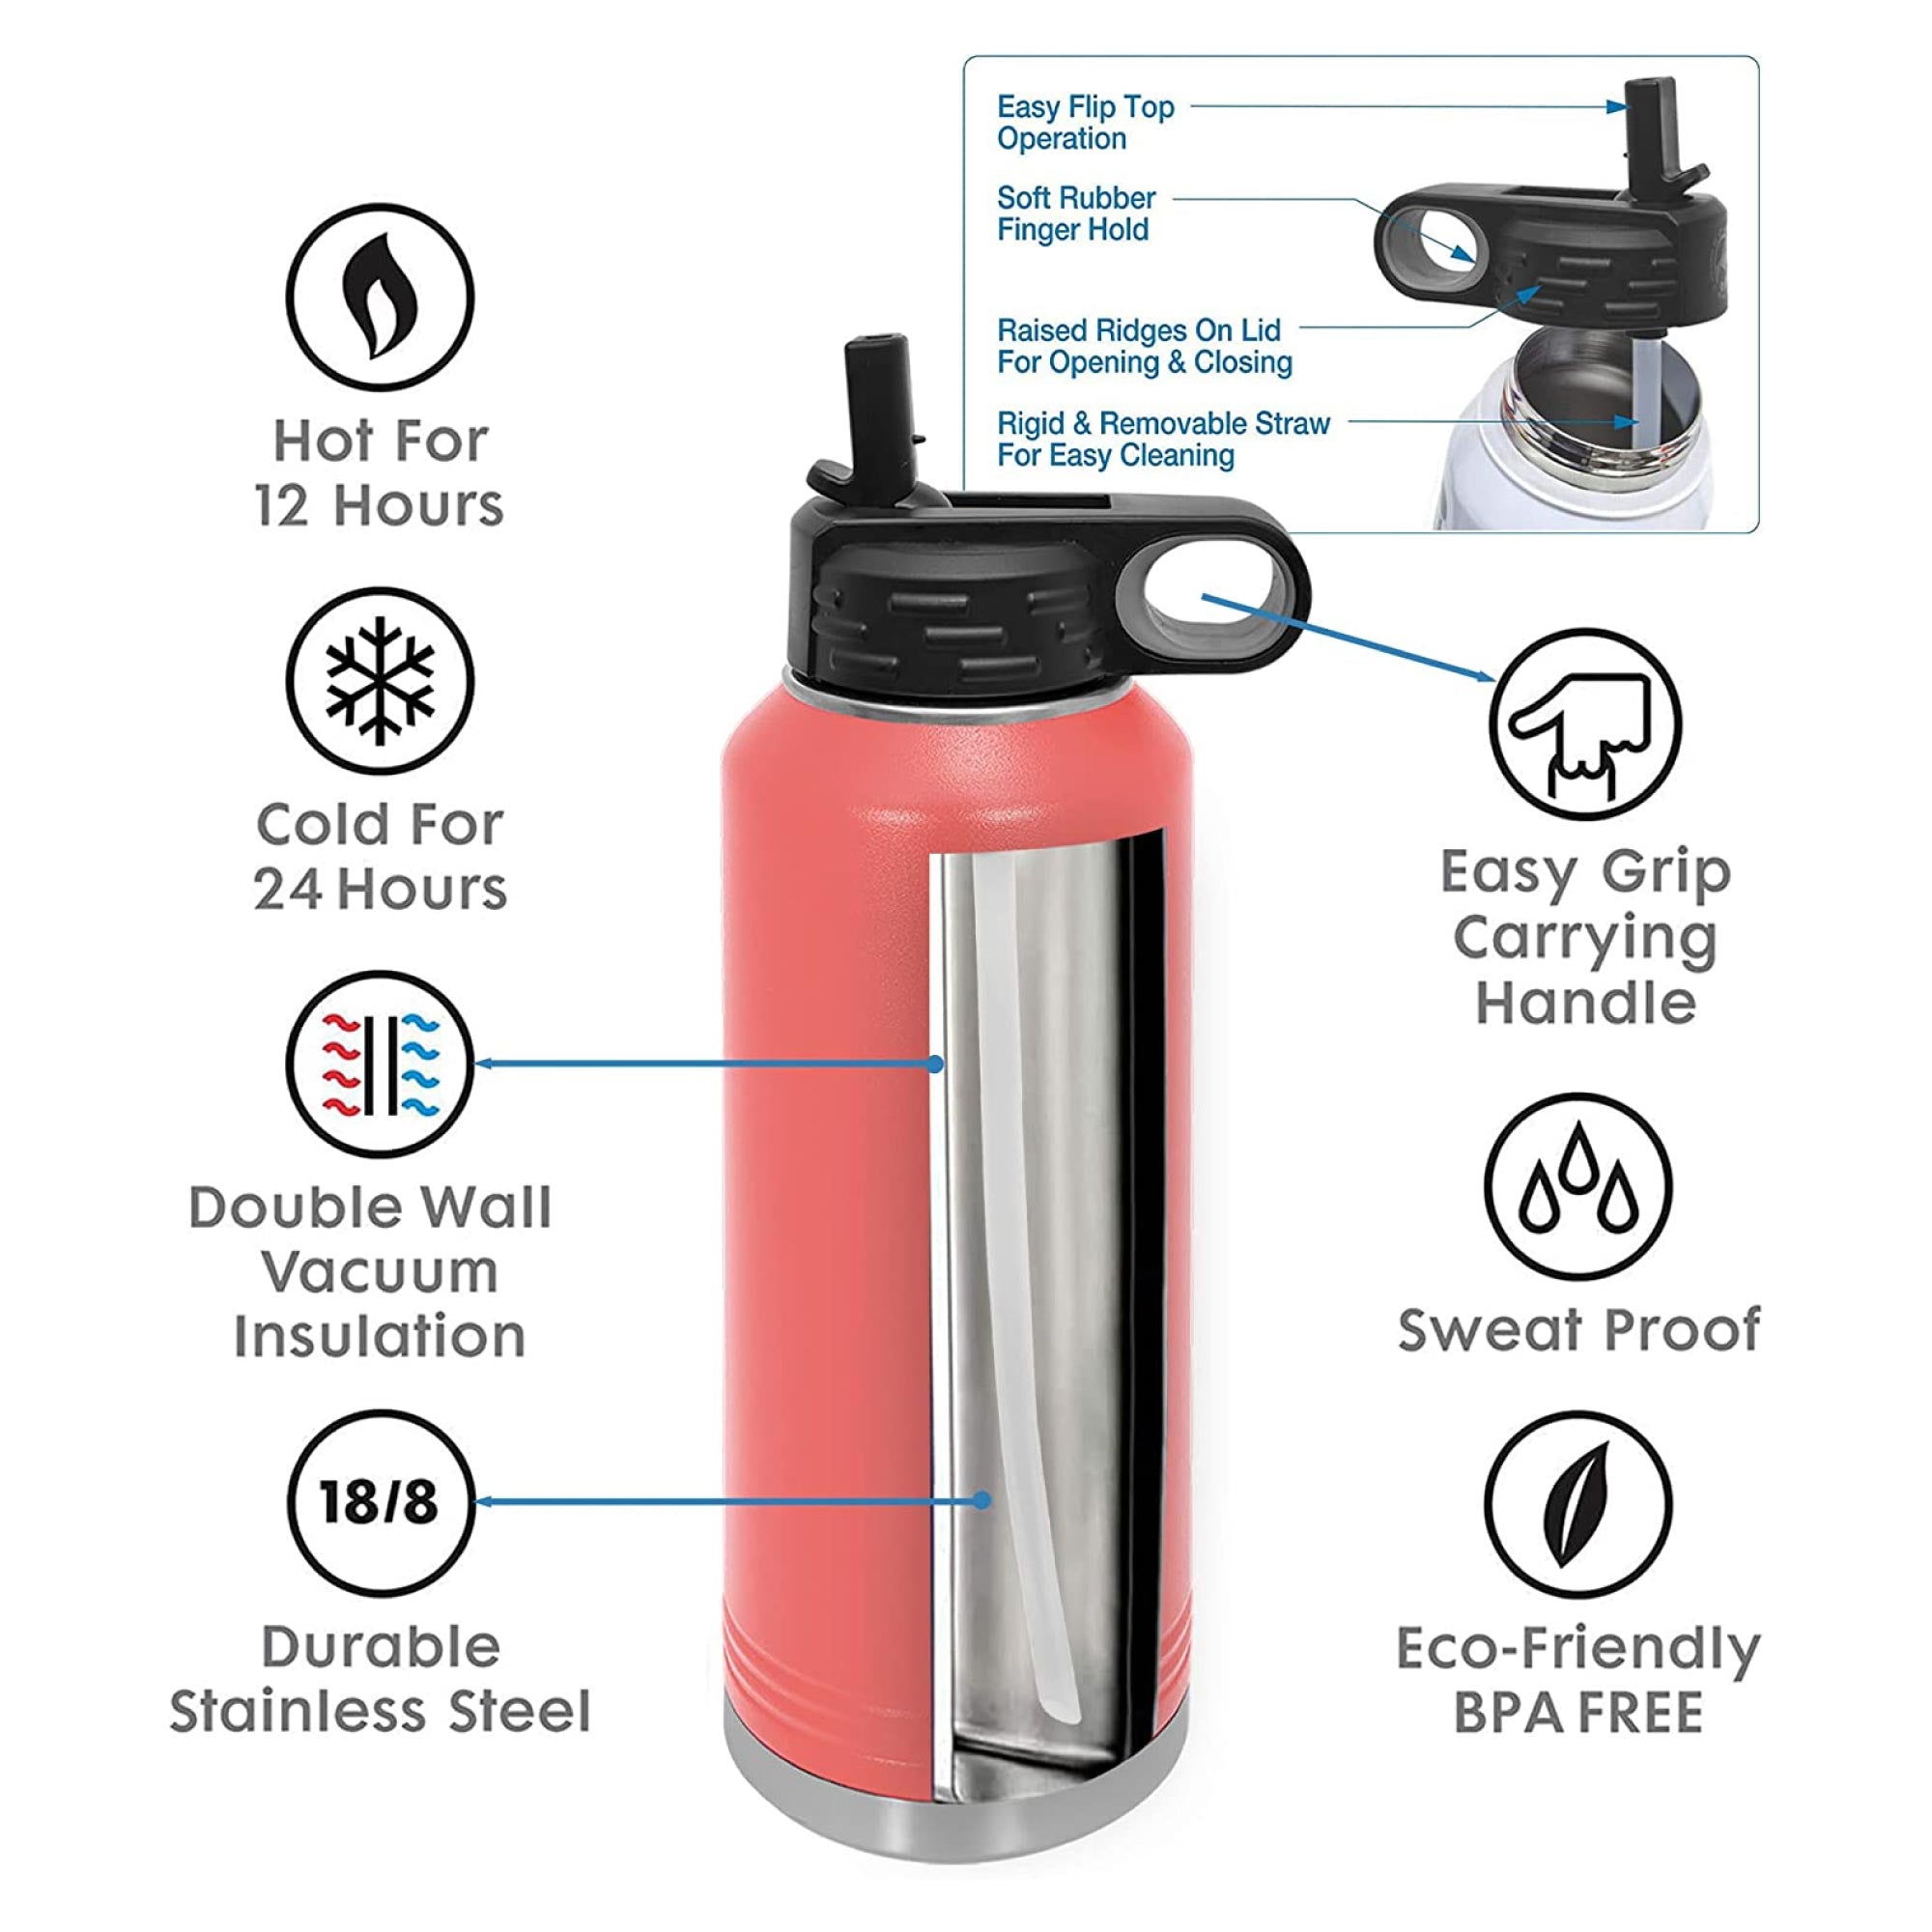  Customized Insulated Bottle 40oz/32oz with Flip-Top